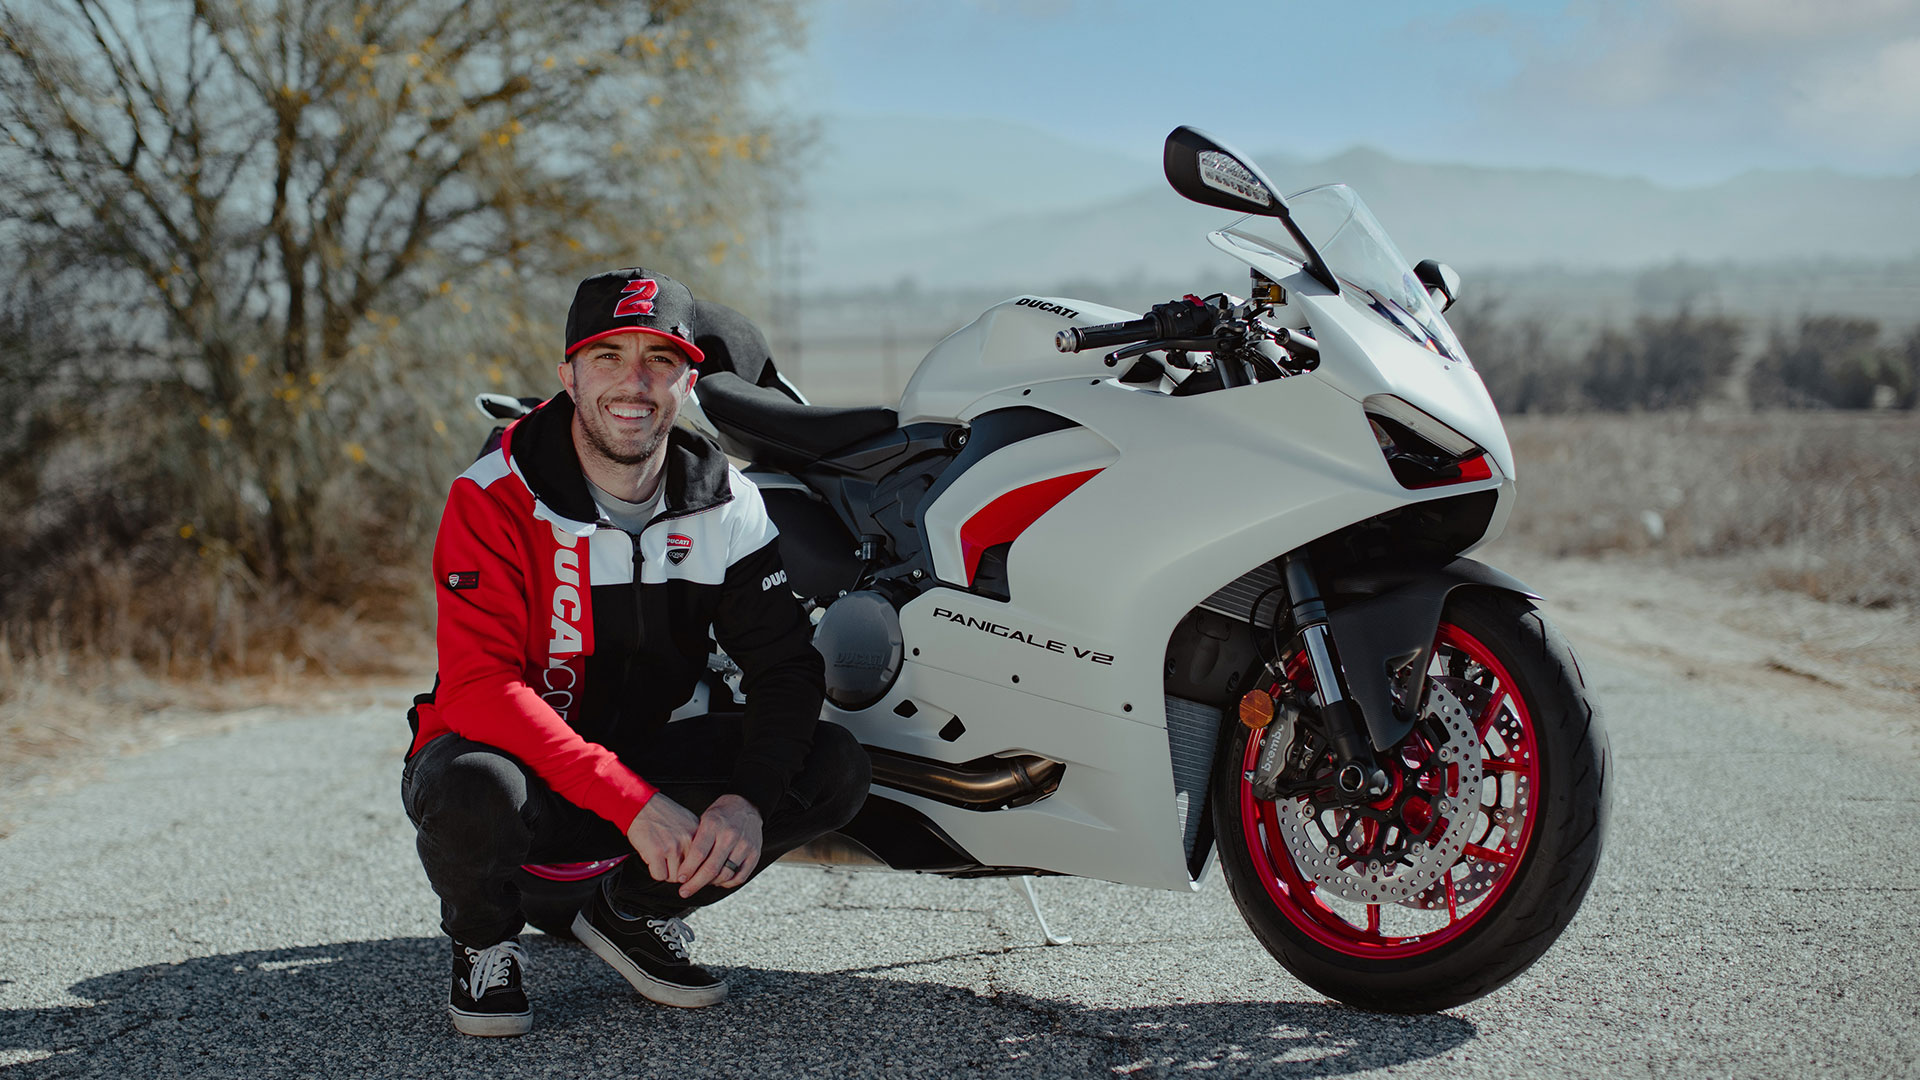 Ducati Returns to National Supersport Competition and the Daytona 200 in 2022 With Warhorse HSBK Racing Ducati New York and Josh Herrin